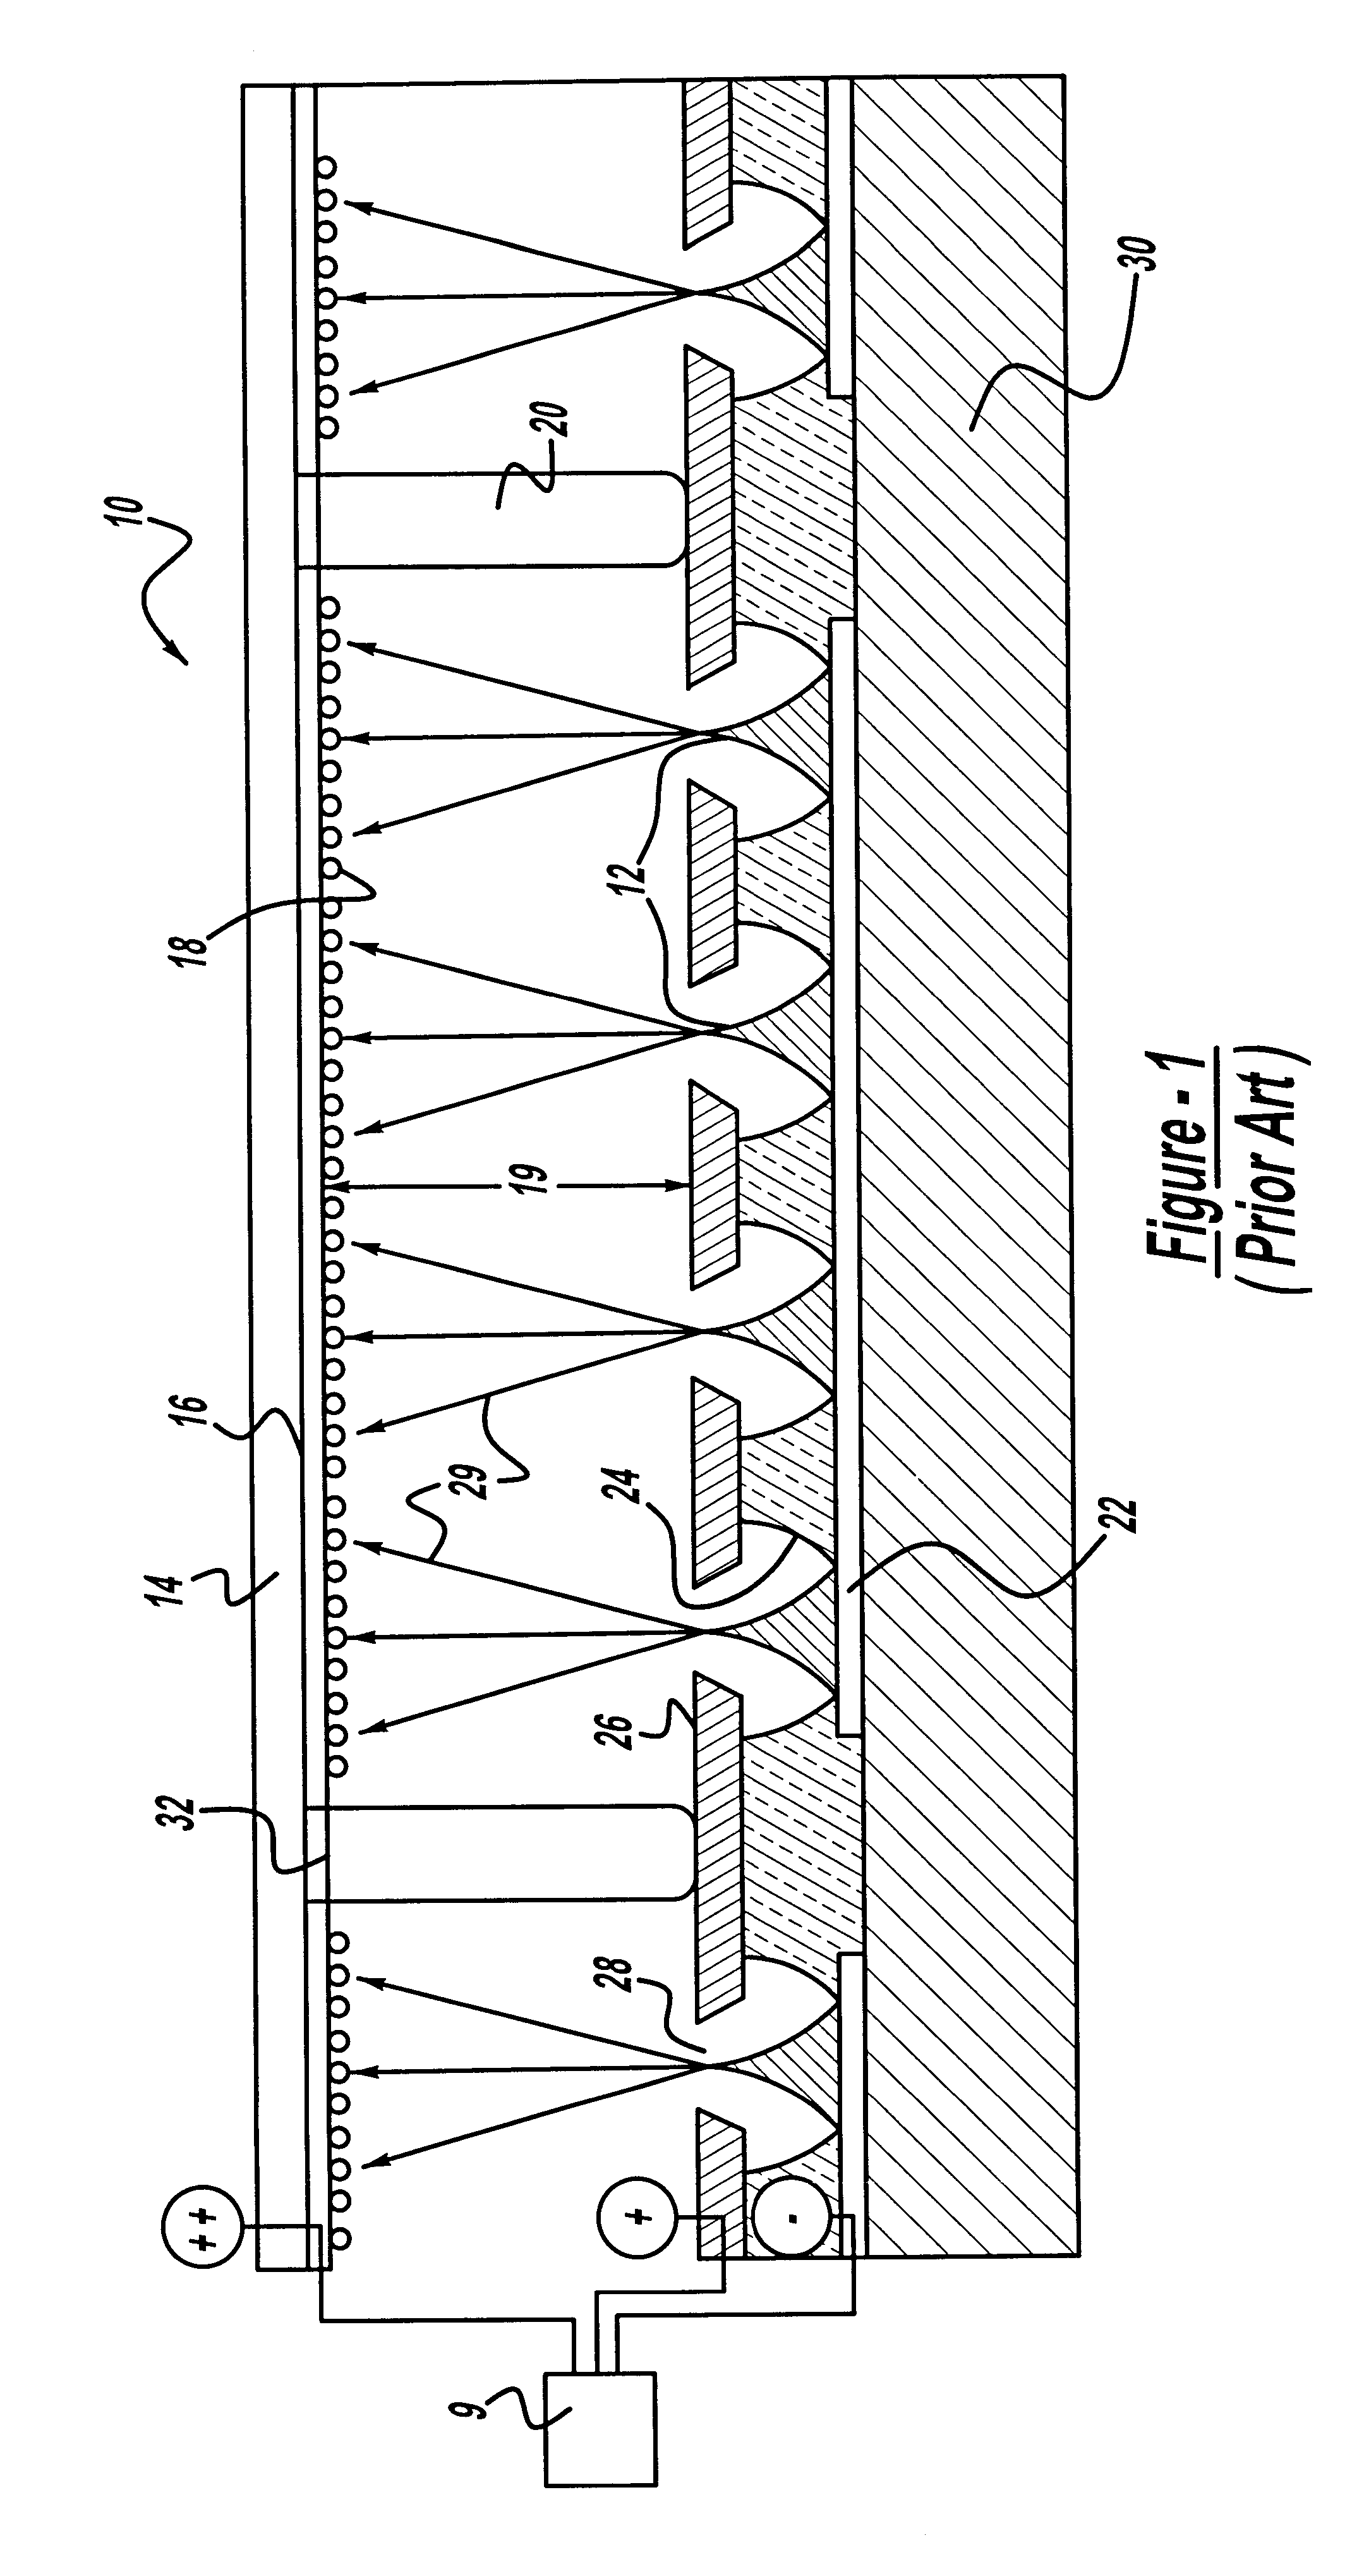 Radioactive cathode emitter for use in field emission display devices